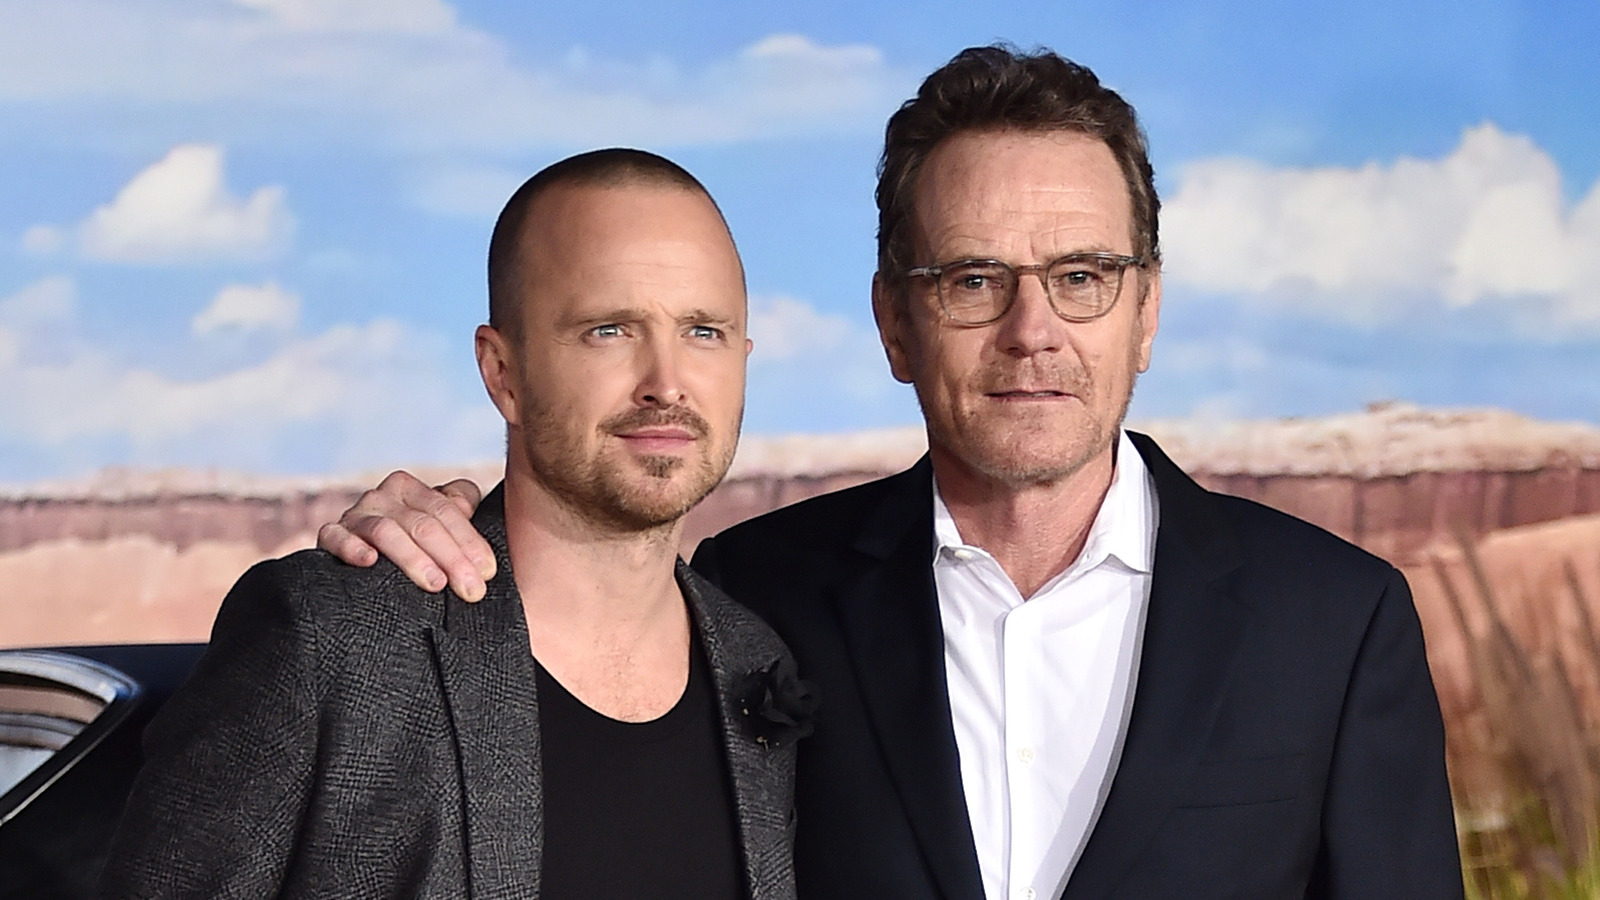 Breaking Bads Bryan Cranston And Aaron Paul Say They Created Their Business Just To Hang Out